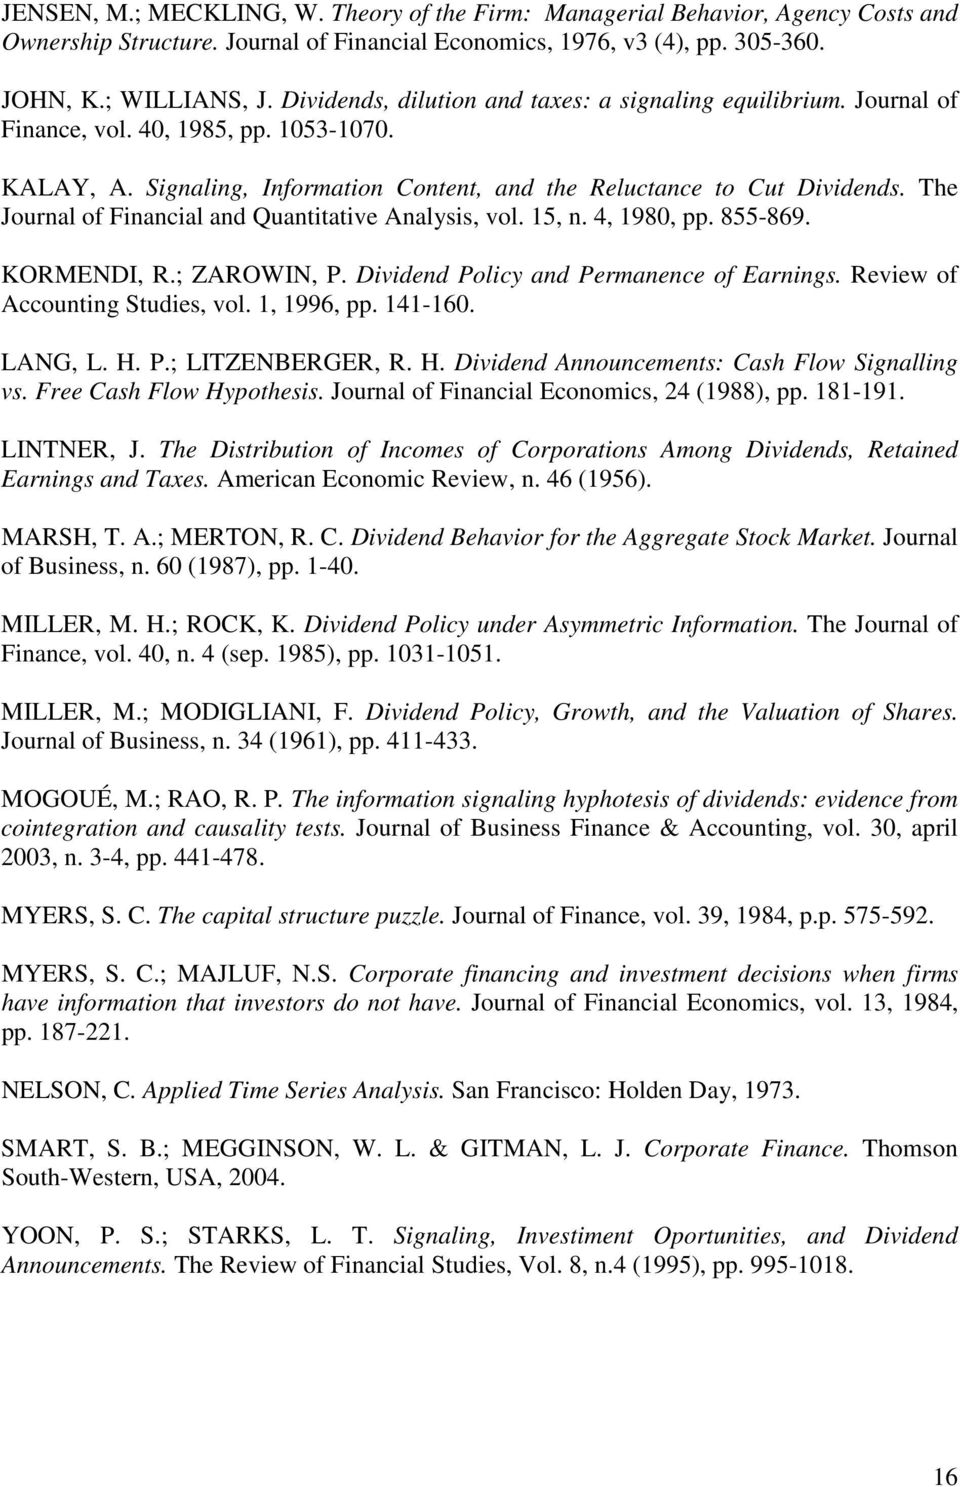 The Joural of Fiacial ad Quaiaive Aalysis, vol. 5,. 4, 980, pp. 855-869. KORMENDI, R.; ZAROWIN, P. Divided Policy ad Permaece of Earigs. Review of Accouig Sudies, vol., 996, pp. 4-60. LANG, L. H. P.; LITZENBERGER, R.